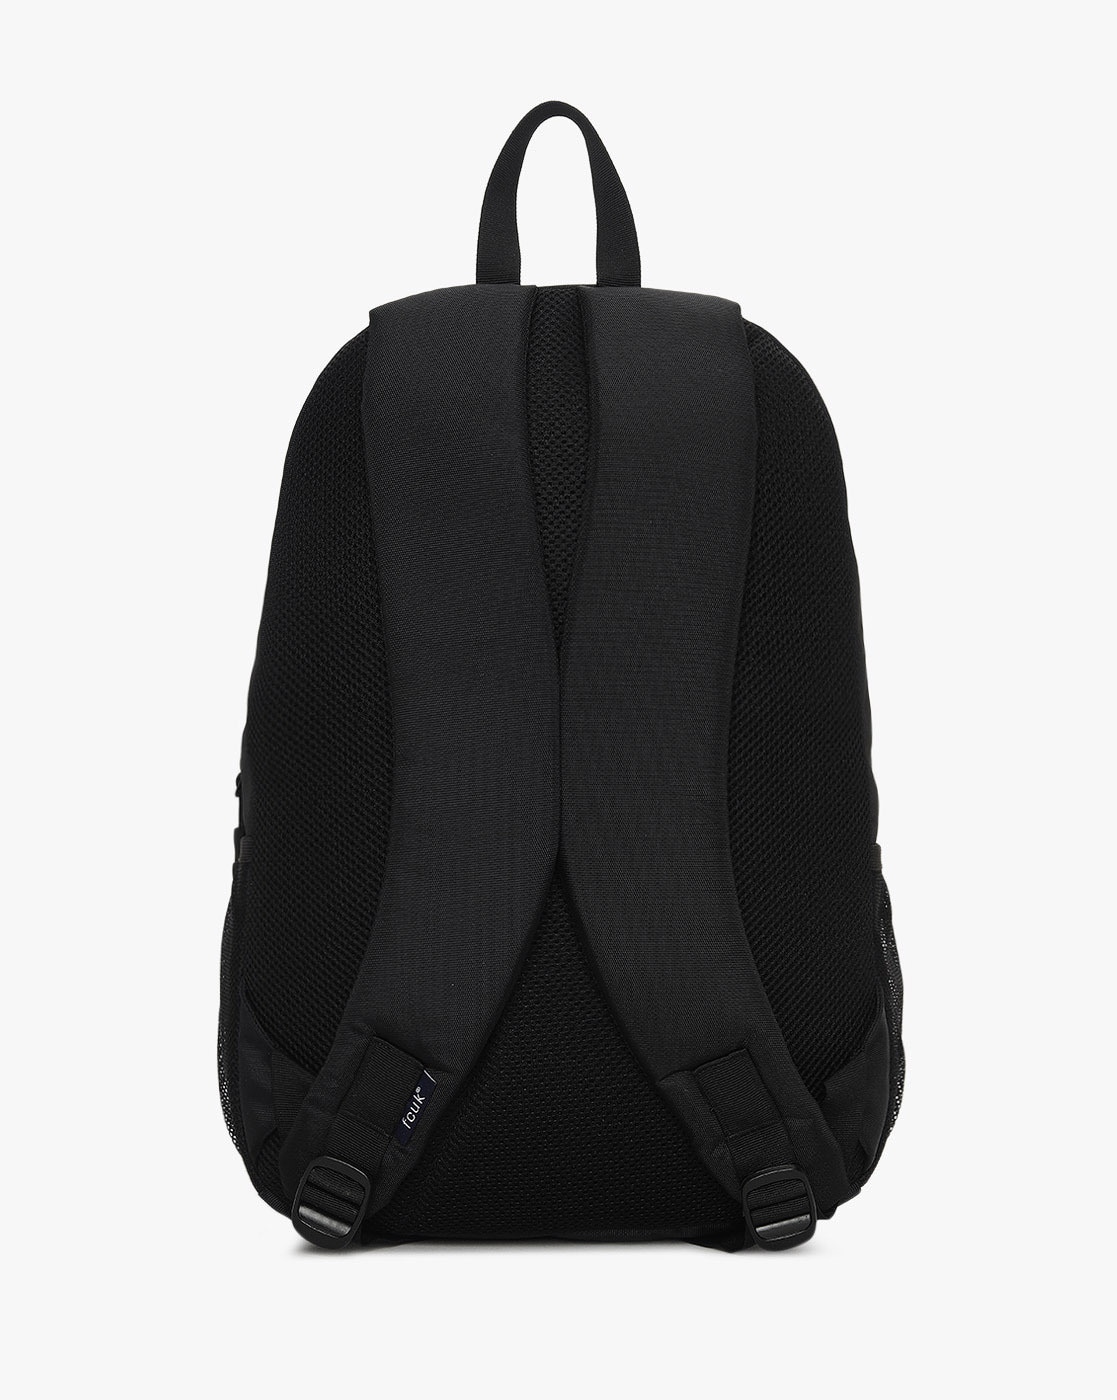 Buy SKYBAGS Multi Stylish Design Polyester Unisex Backpack | Shoppers Stop